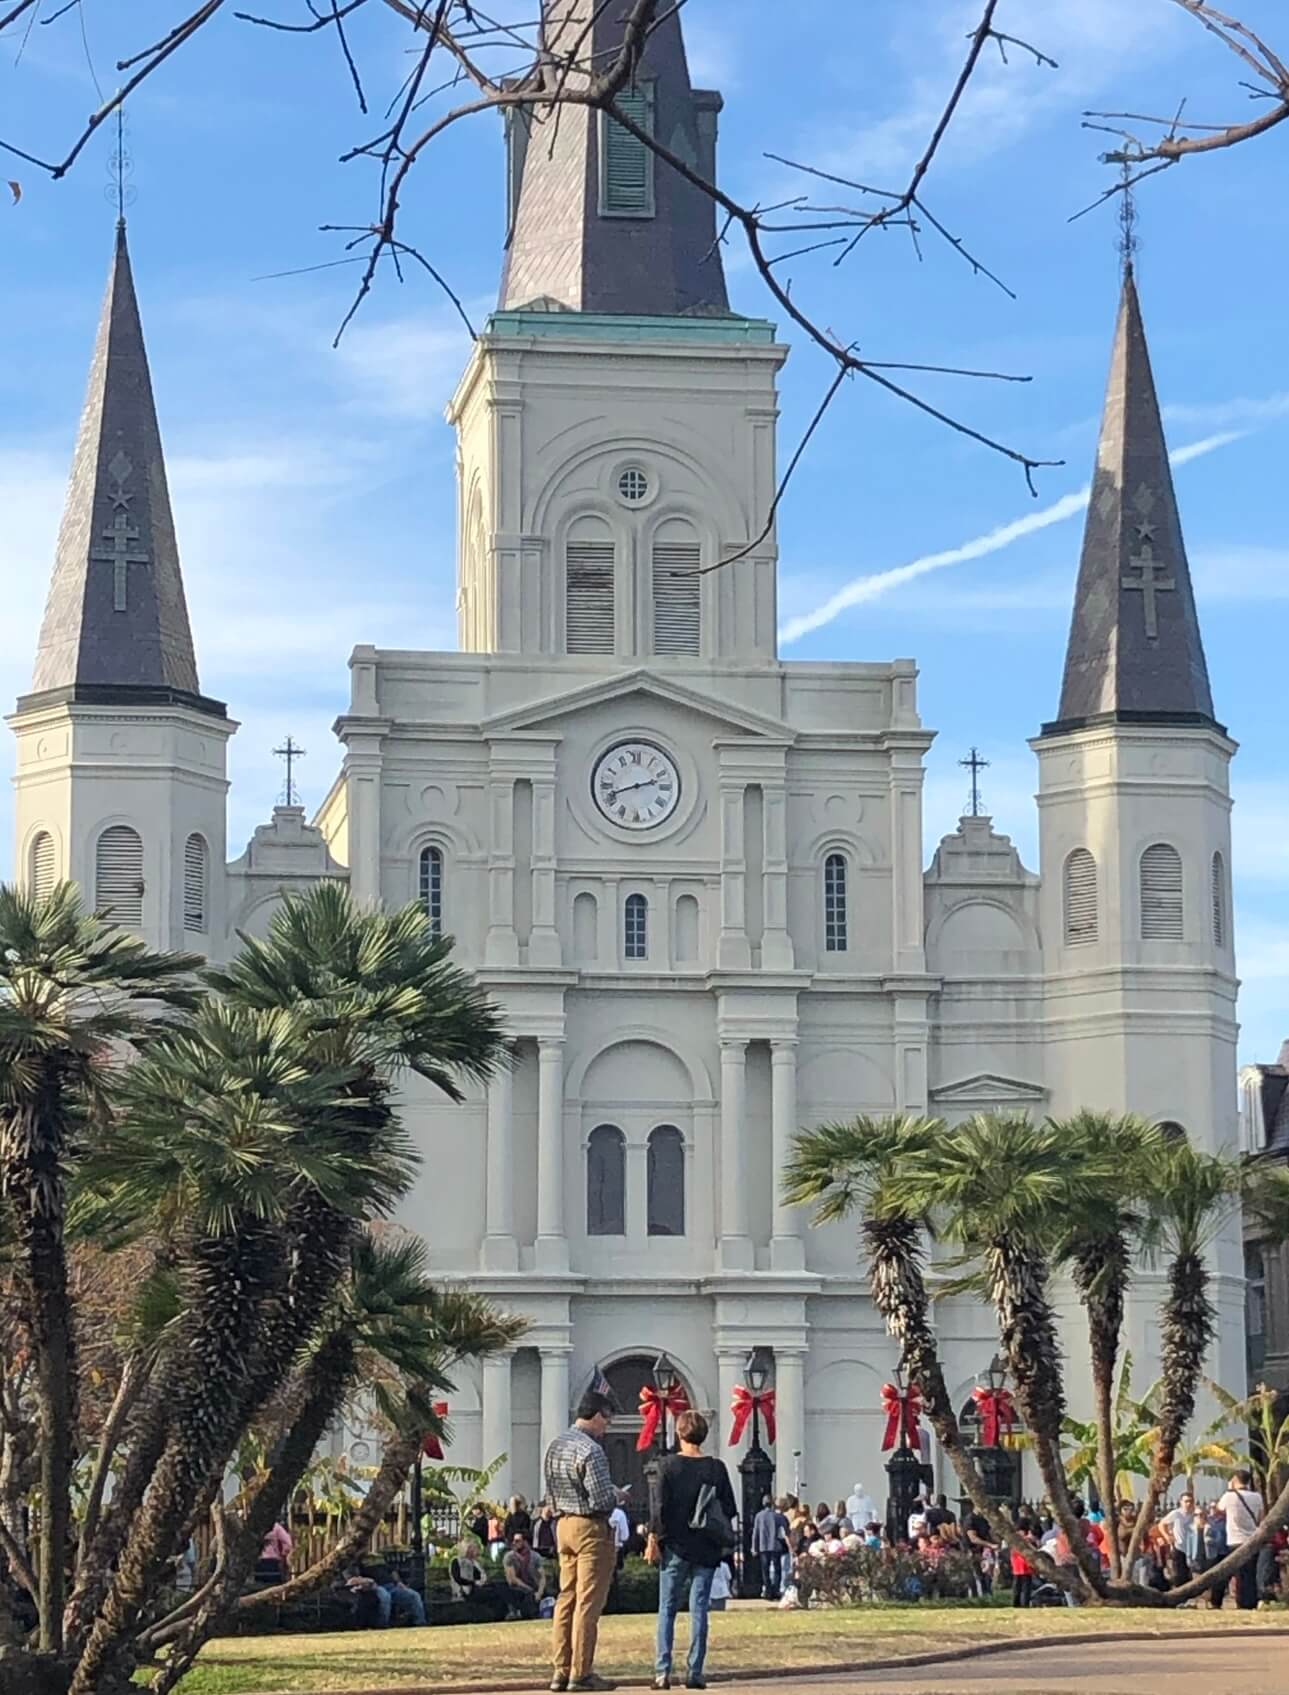 St Louis cathedral, New Orleans